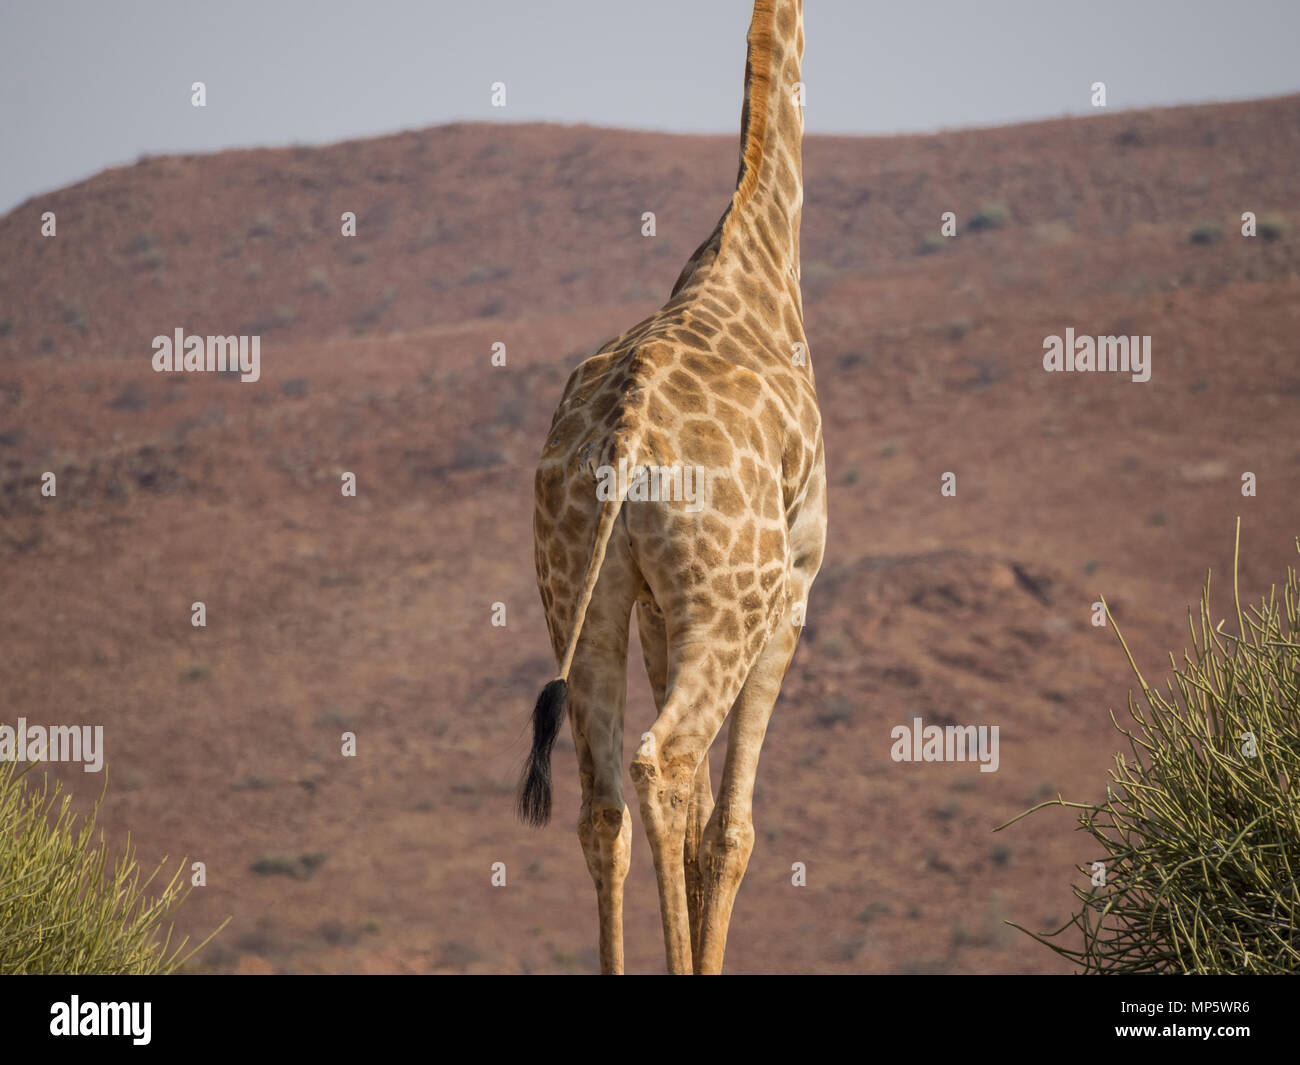 Lower part of African giraffe in front of rocky mountain, Palmwag Concession, Namibia, Africa Stock Photo